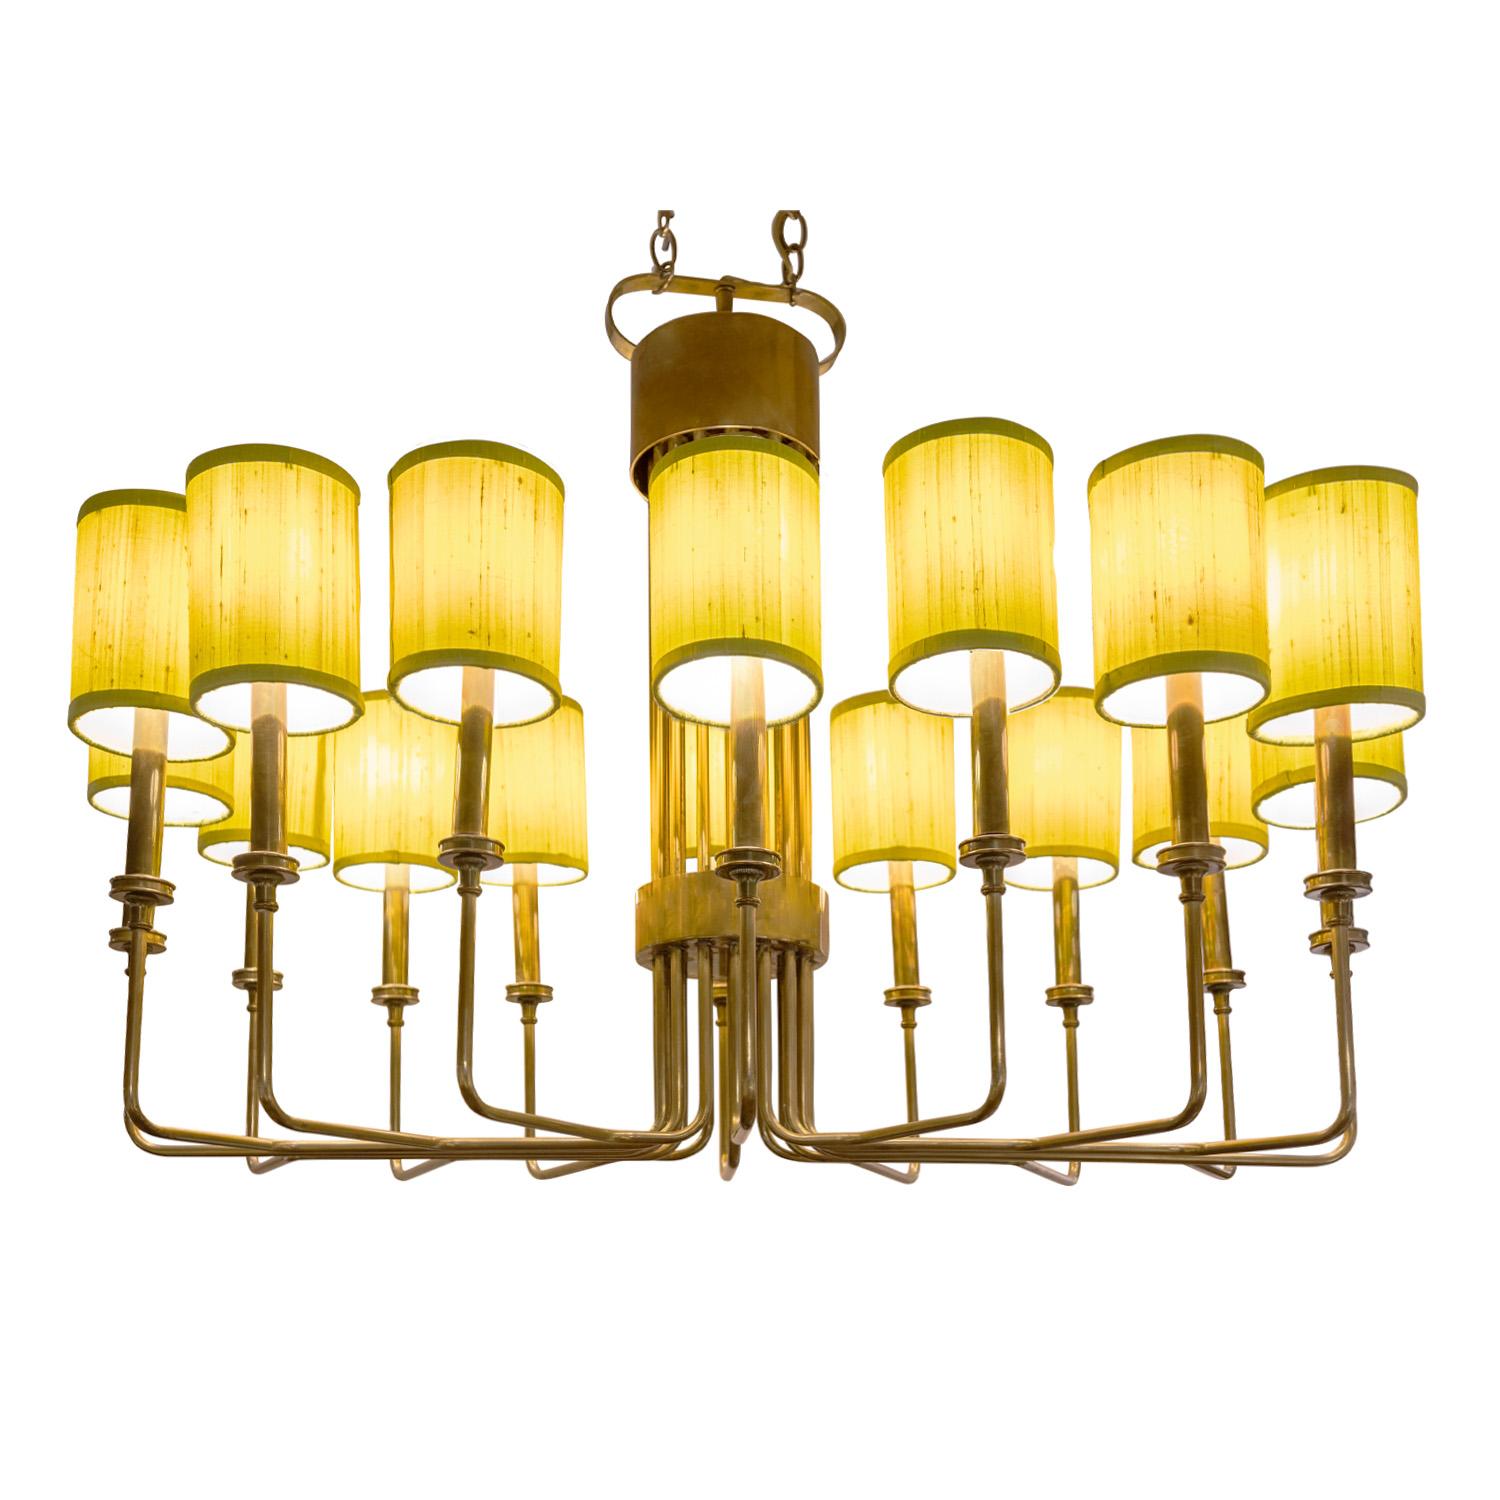 Impressive 16 arm chandelier in brass with custom yellow silk shades in the style of Tommi Parzinger, American 1950s. This chandelier is beautifully made and very elegant.

Measure: H: 28 inches body only
Can customize drop to spec.